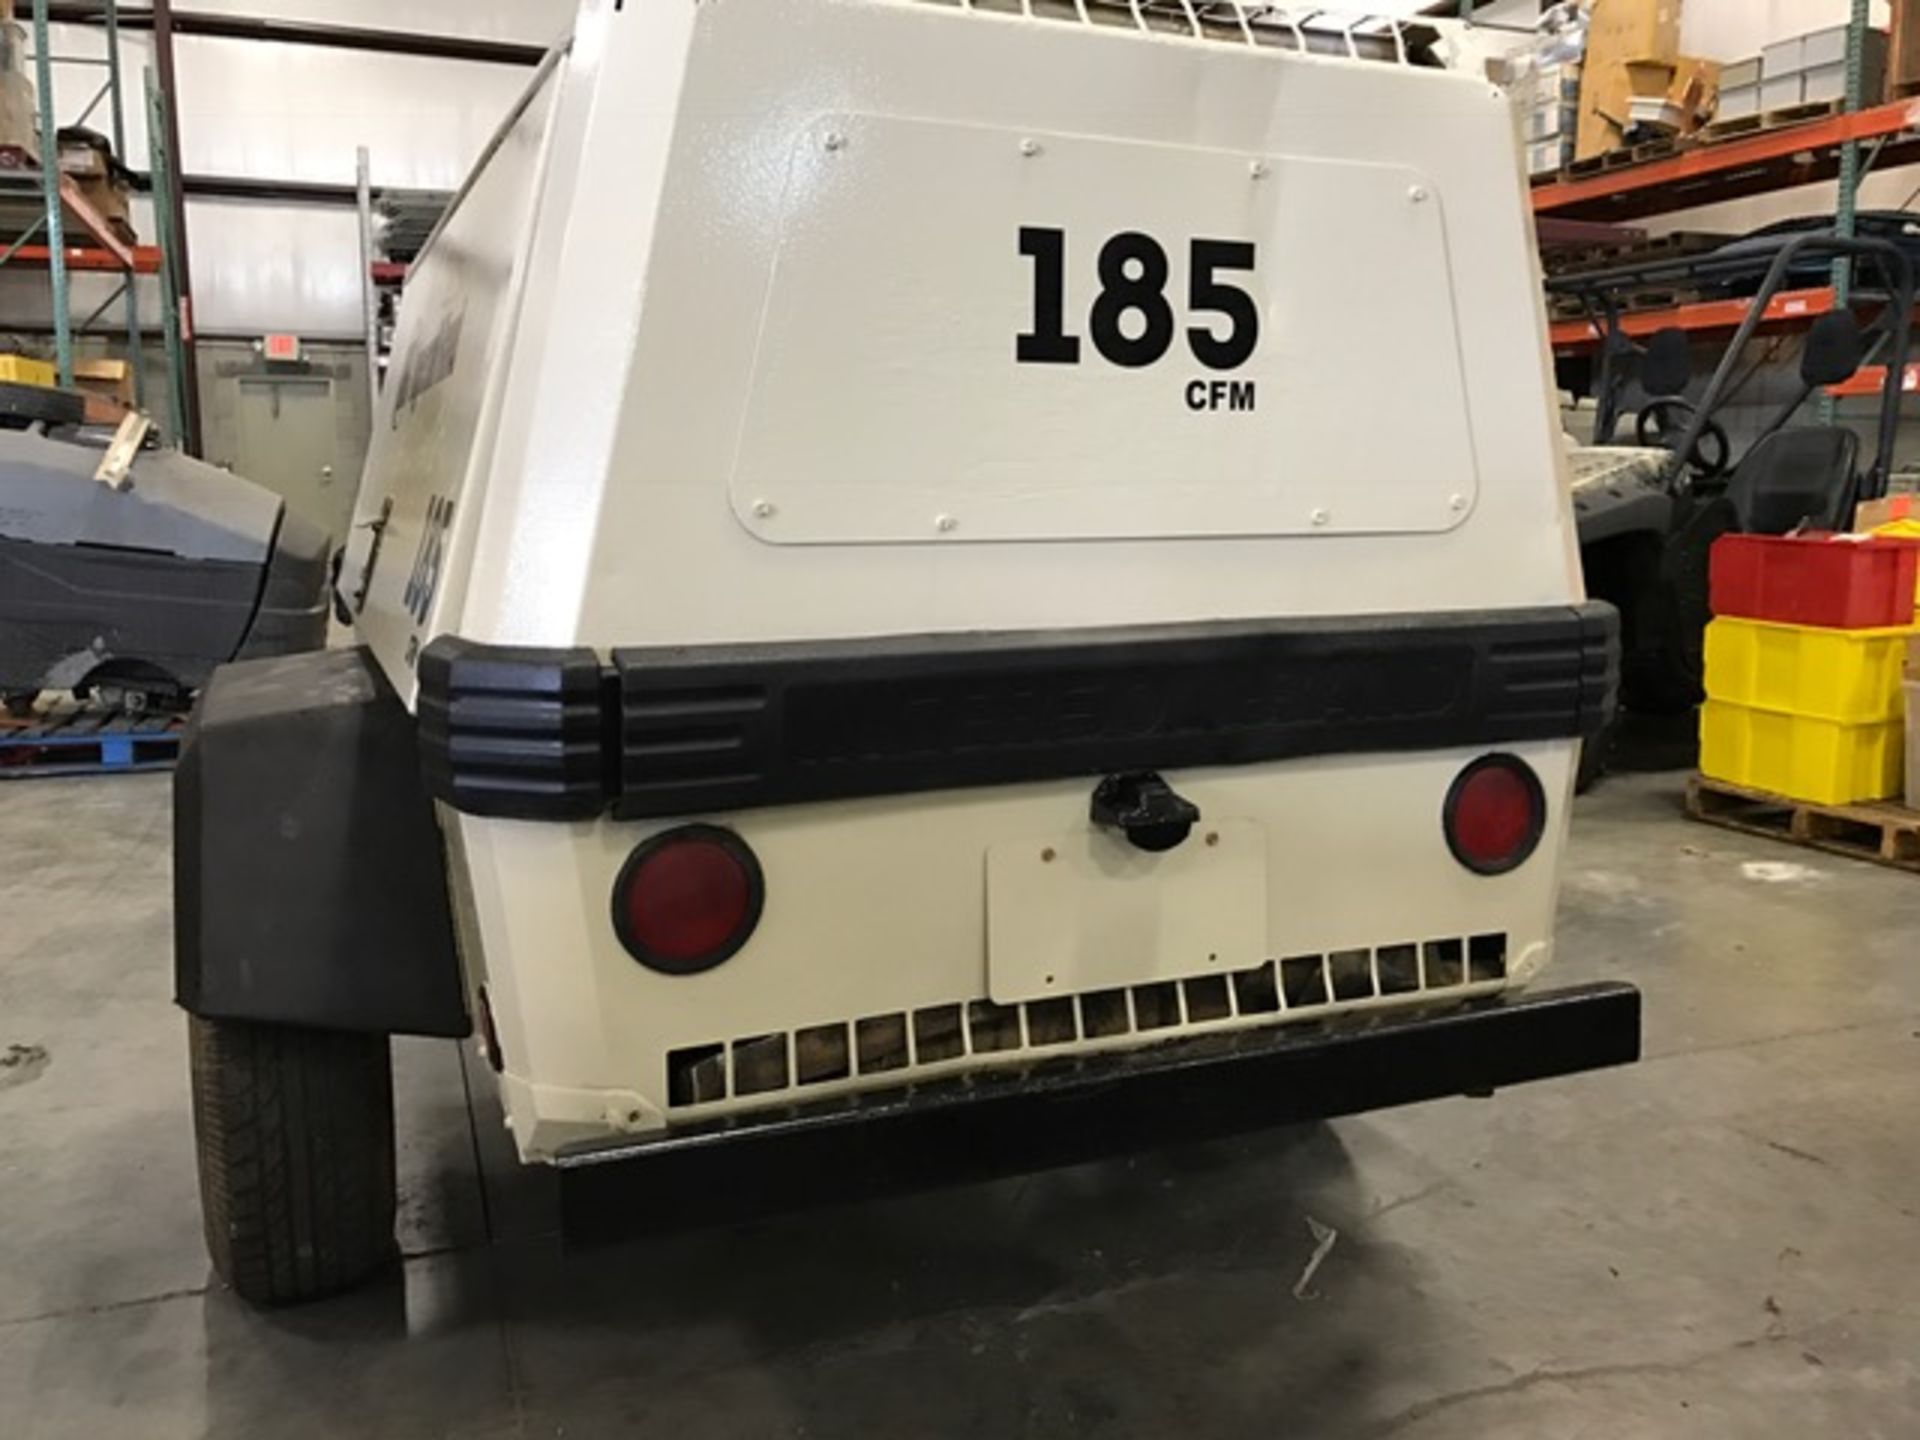 INGERSOLL RAND P185, 1,169 HOURS SHOWING, DIESEL, ADJUSTABLE PINTLE HITCH - Image 4 of 6